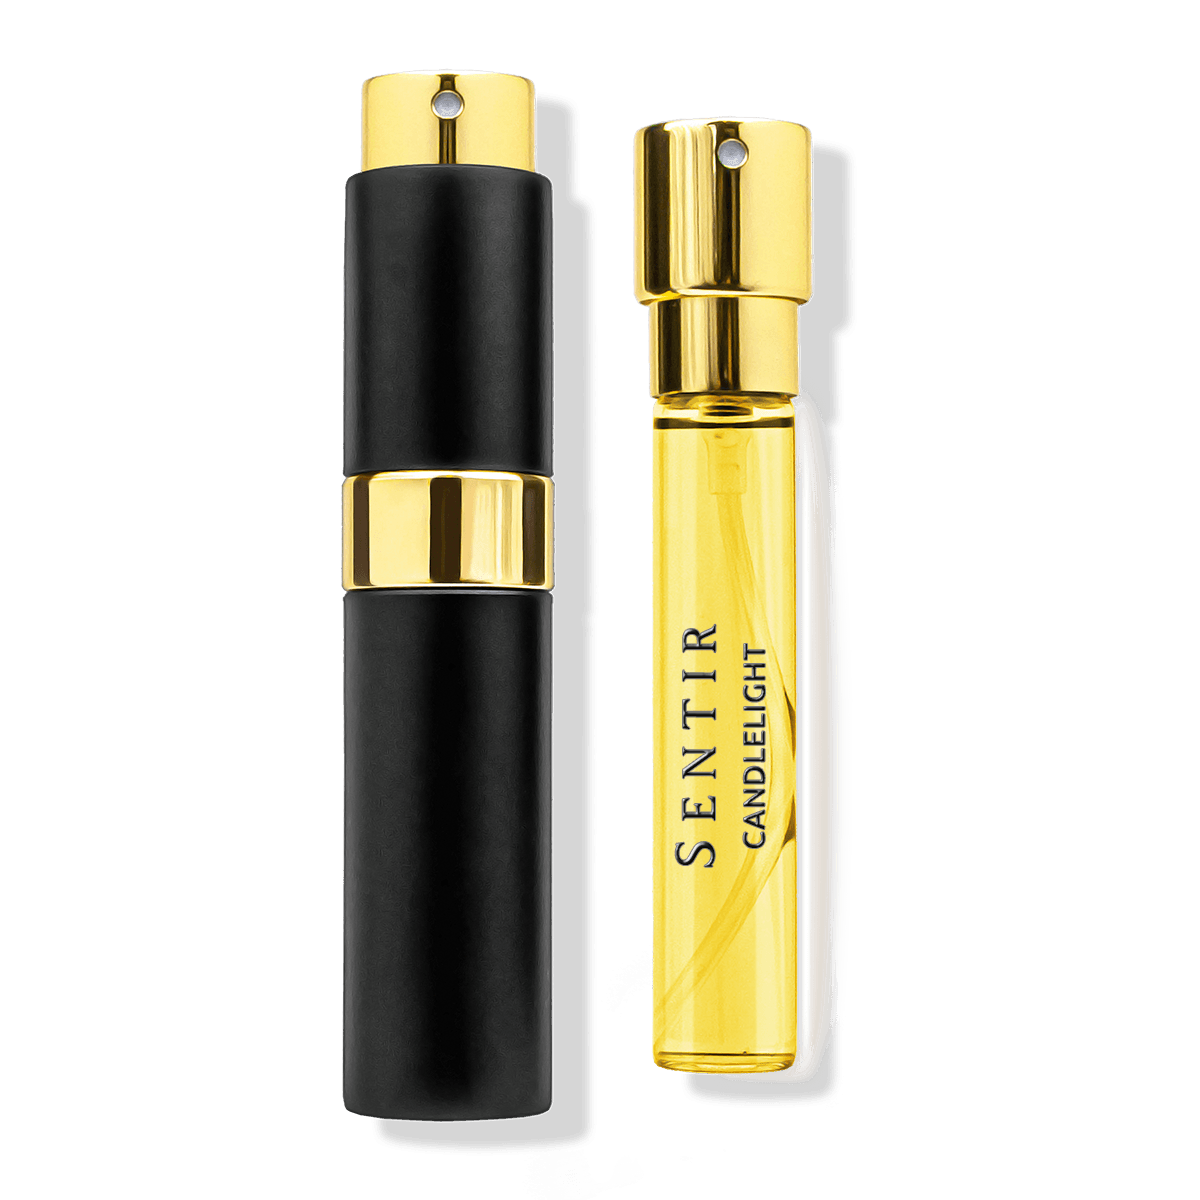 Tom Ford Tobacco Vanille Dupe, Clone, replica, Similar to, vergelijkbaar, smell-a-like, smell like, perfume like, knock off, inspired, alternative, imitation, alternative, cheap, cheapest price, best price